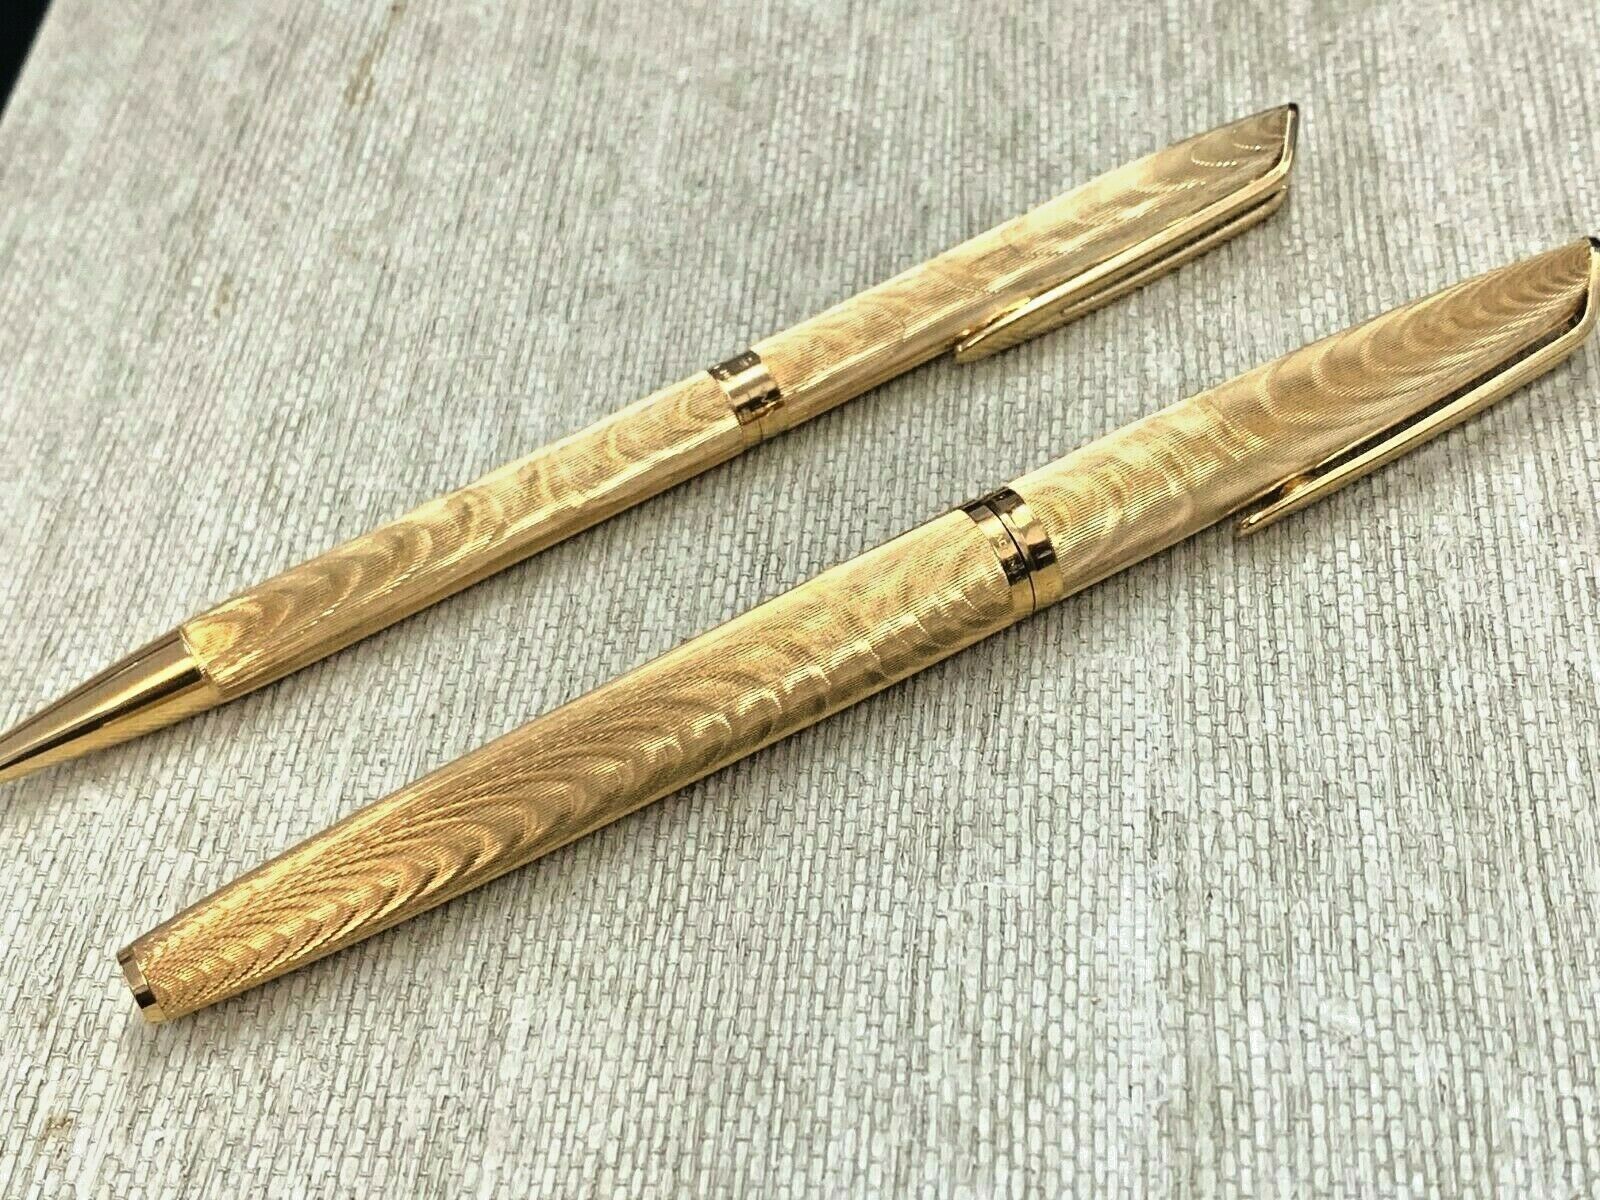 WATERMAN FRANCE GOLDEN WRITING INSTRUMENTS SET 18k POINT IN BOX gold tips